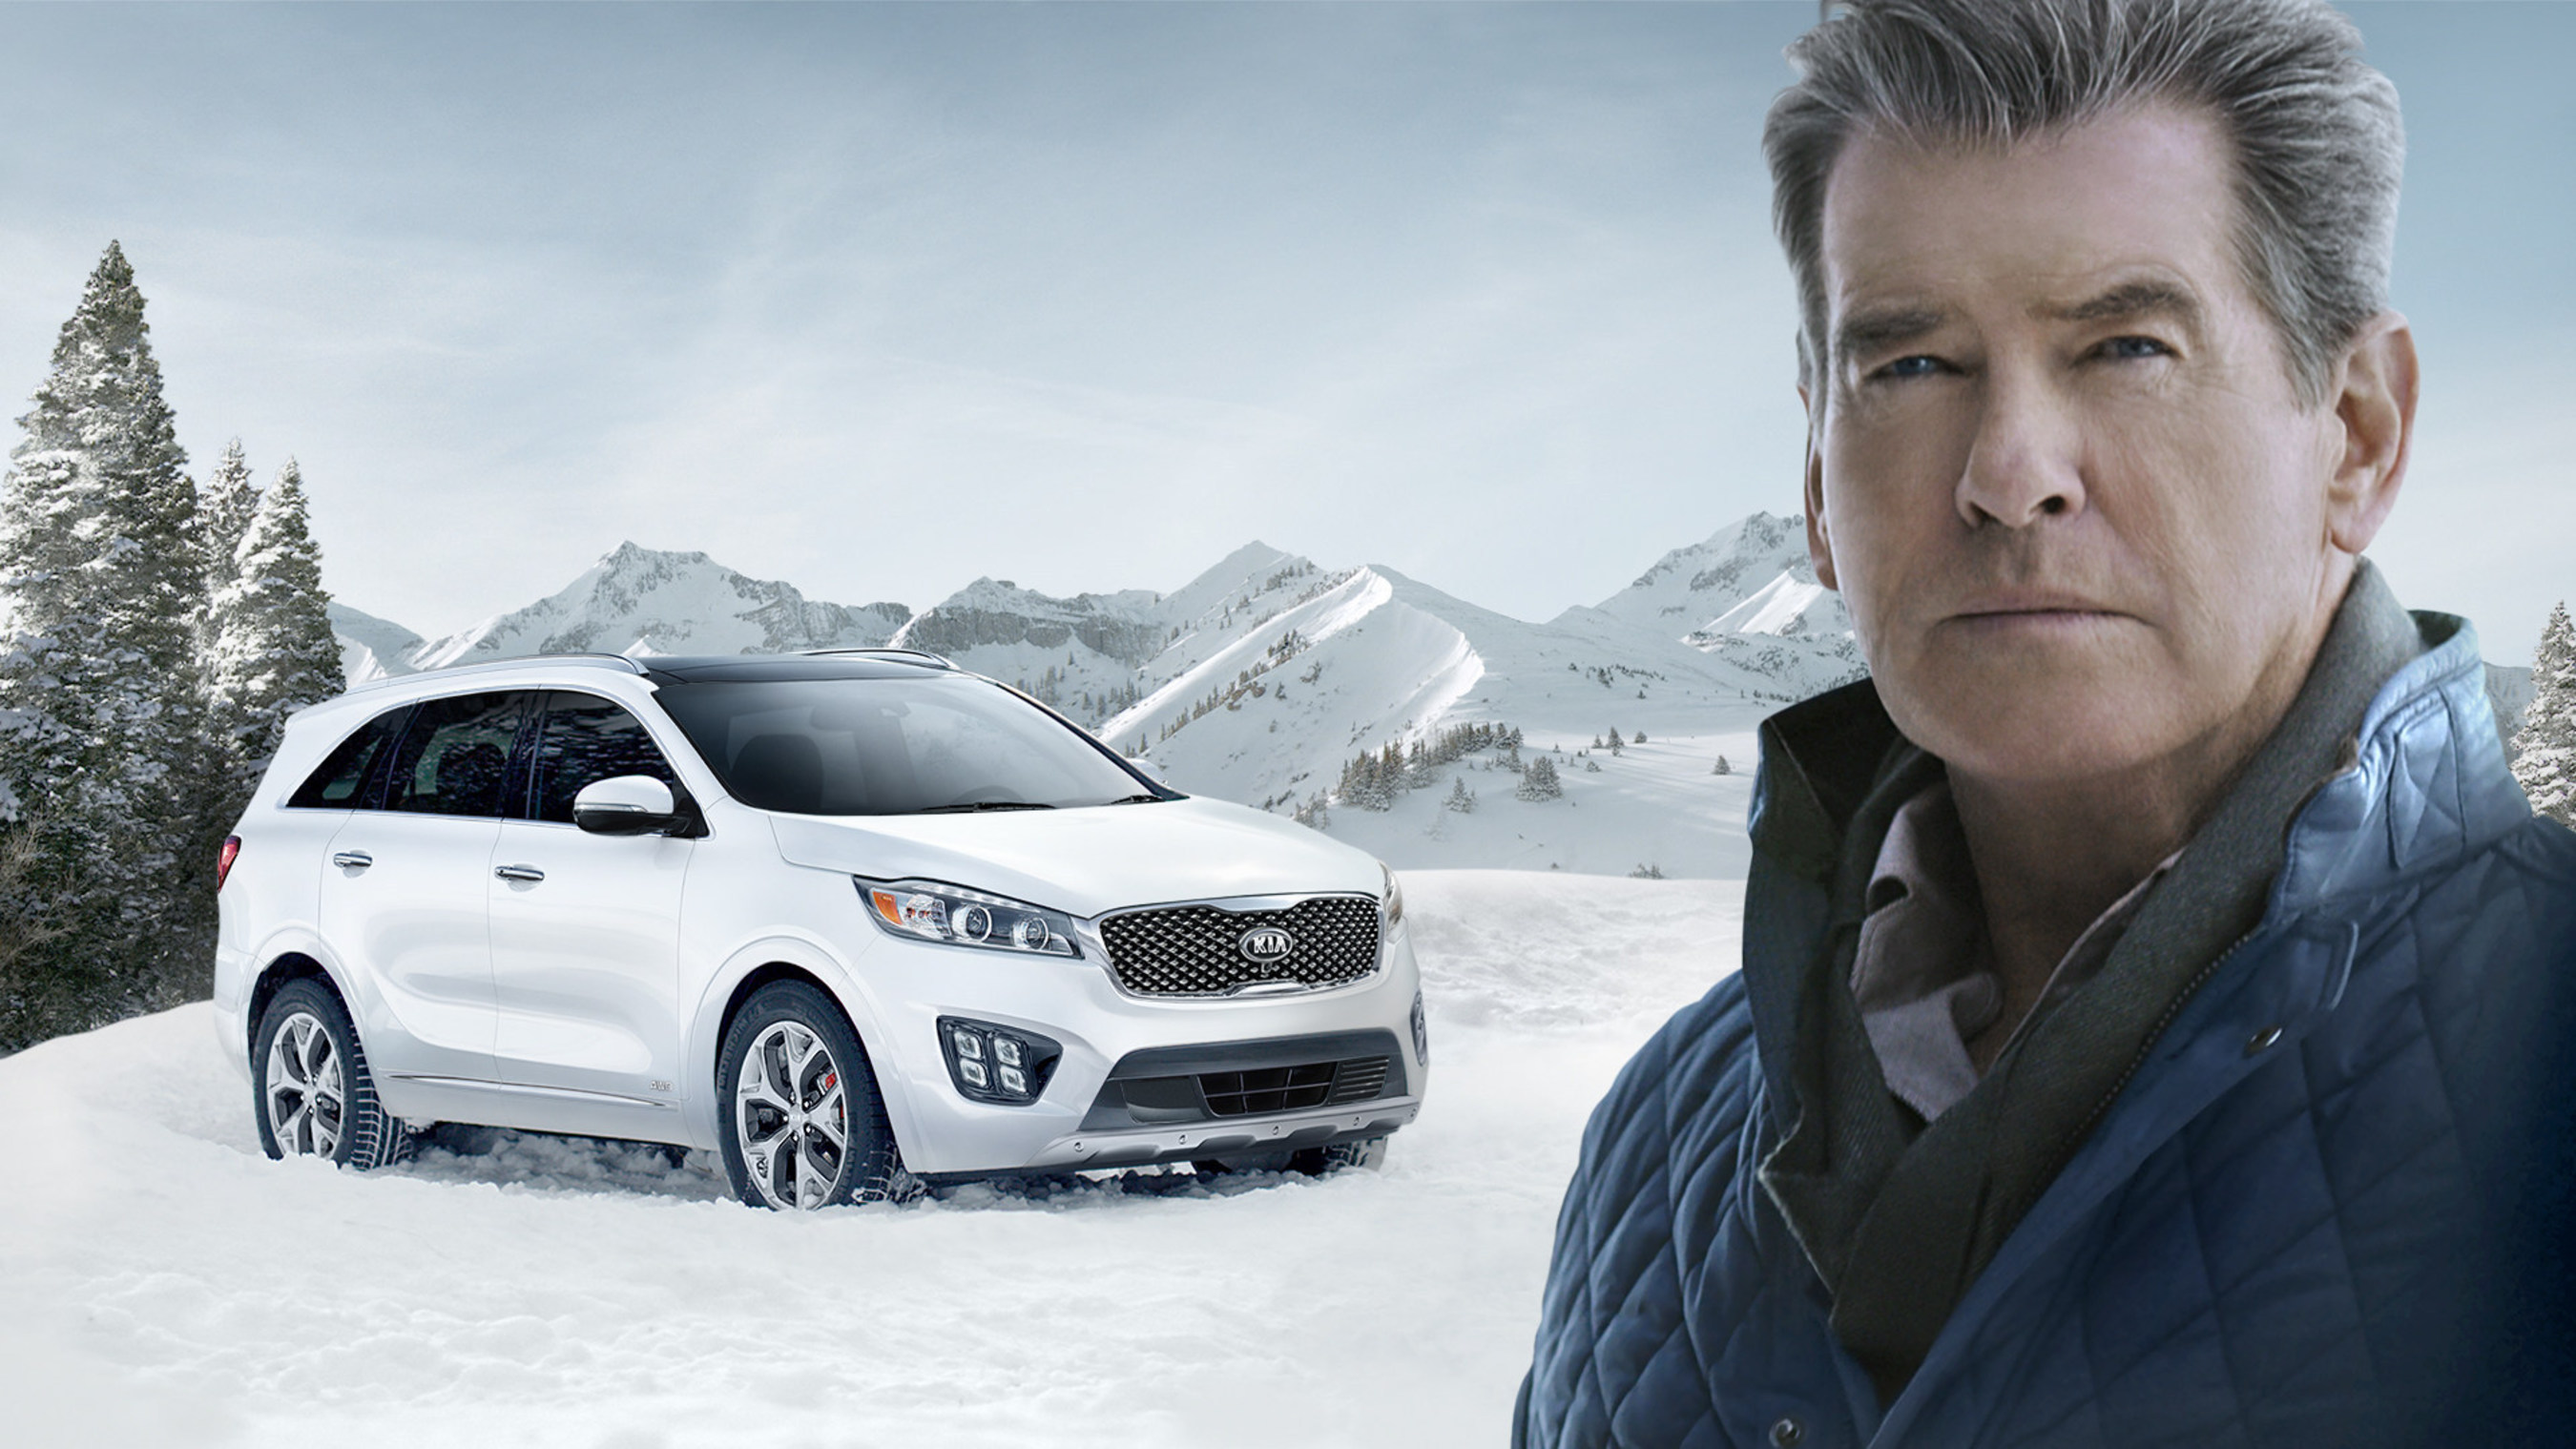 Pierce Brosnan Makes The "Perfect Getaway" In The All-New 2016 Sorento During Kia Motors' Super Bowl Commercial